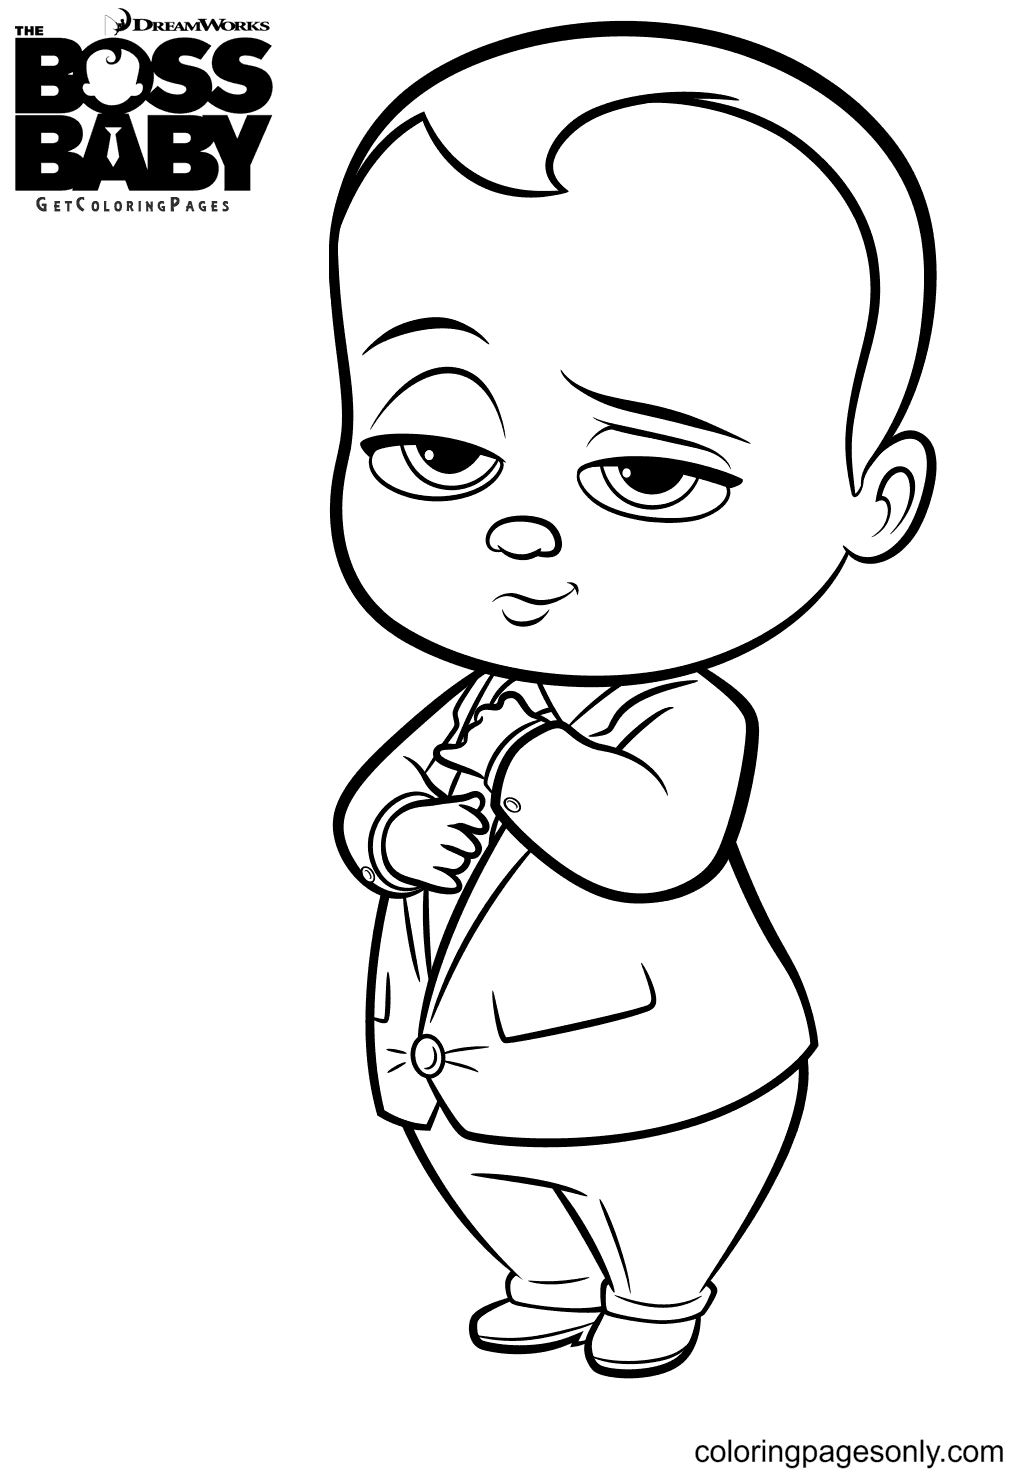 Cute Boss Baby in Suit Coloring Pages